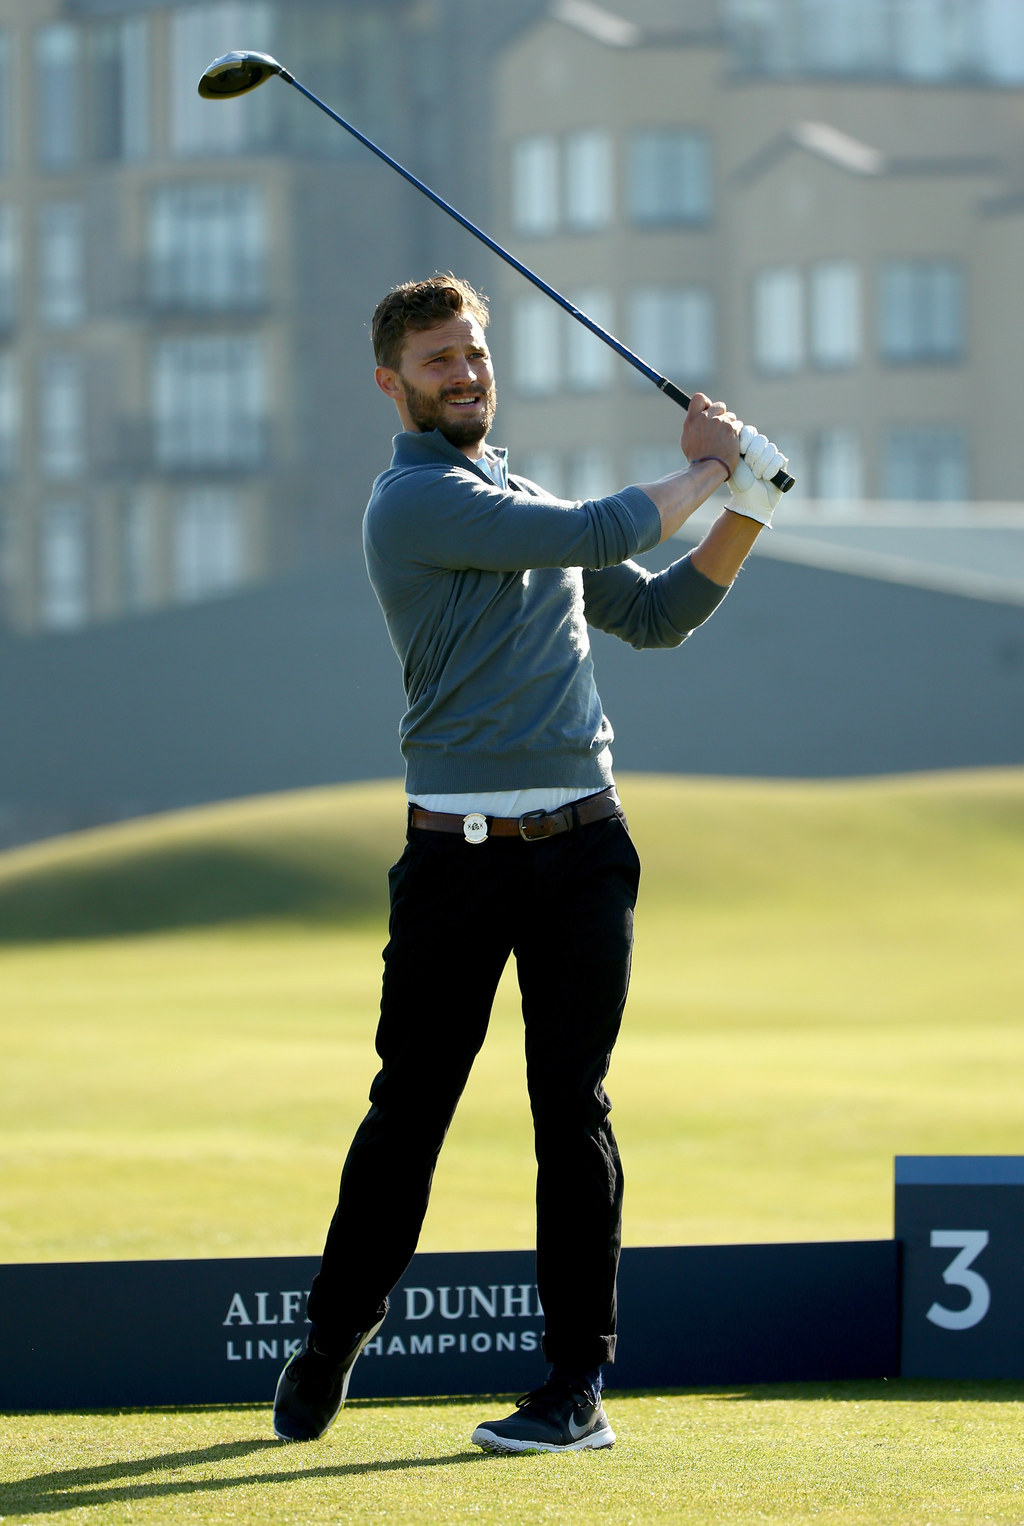 Jamie Dornan Golfing Will Be Your Desktop Background For The Rest Of ...